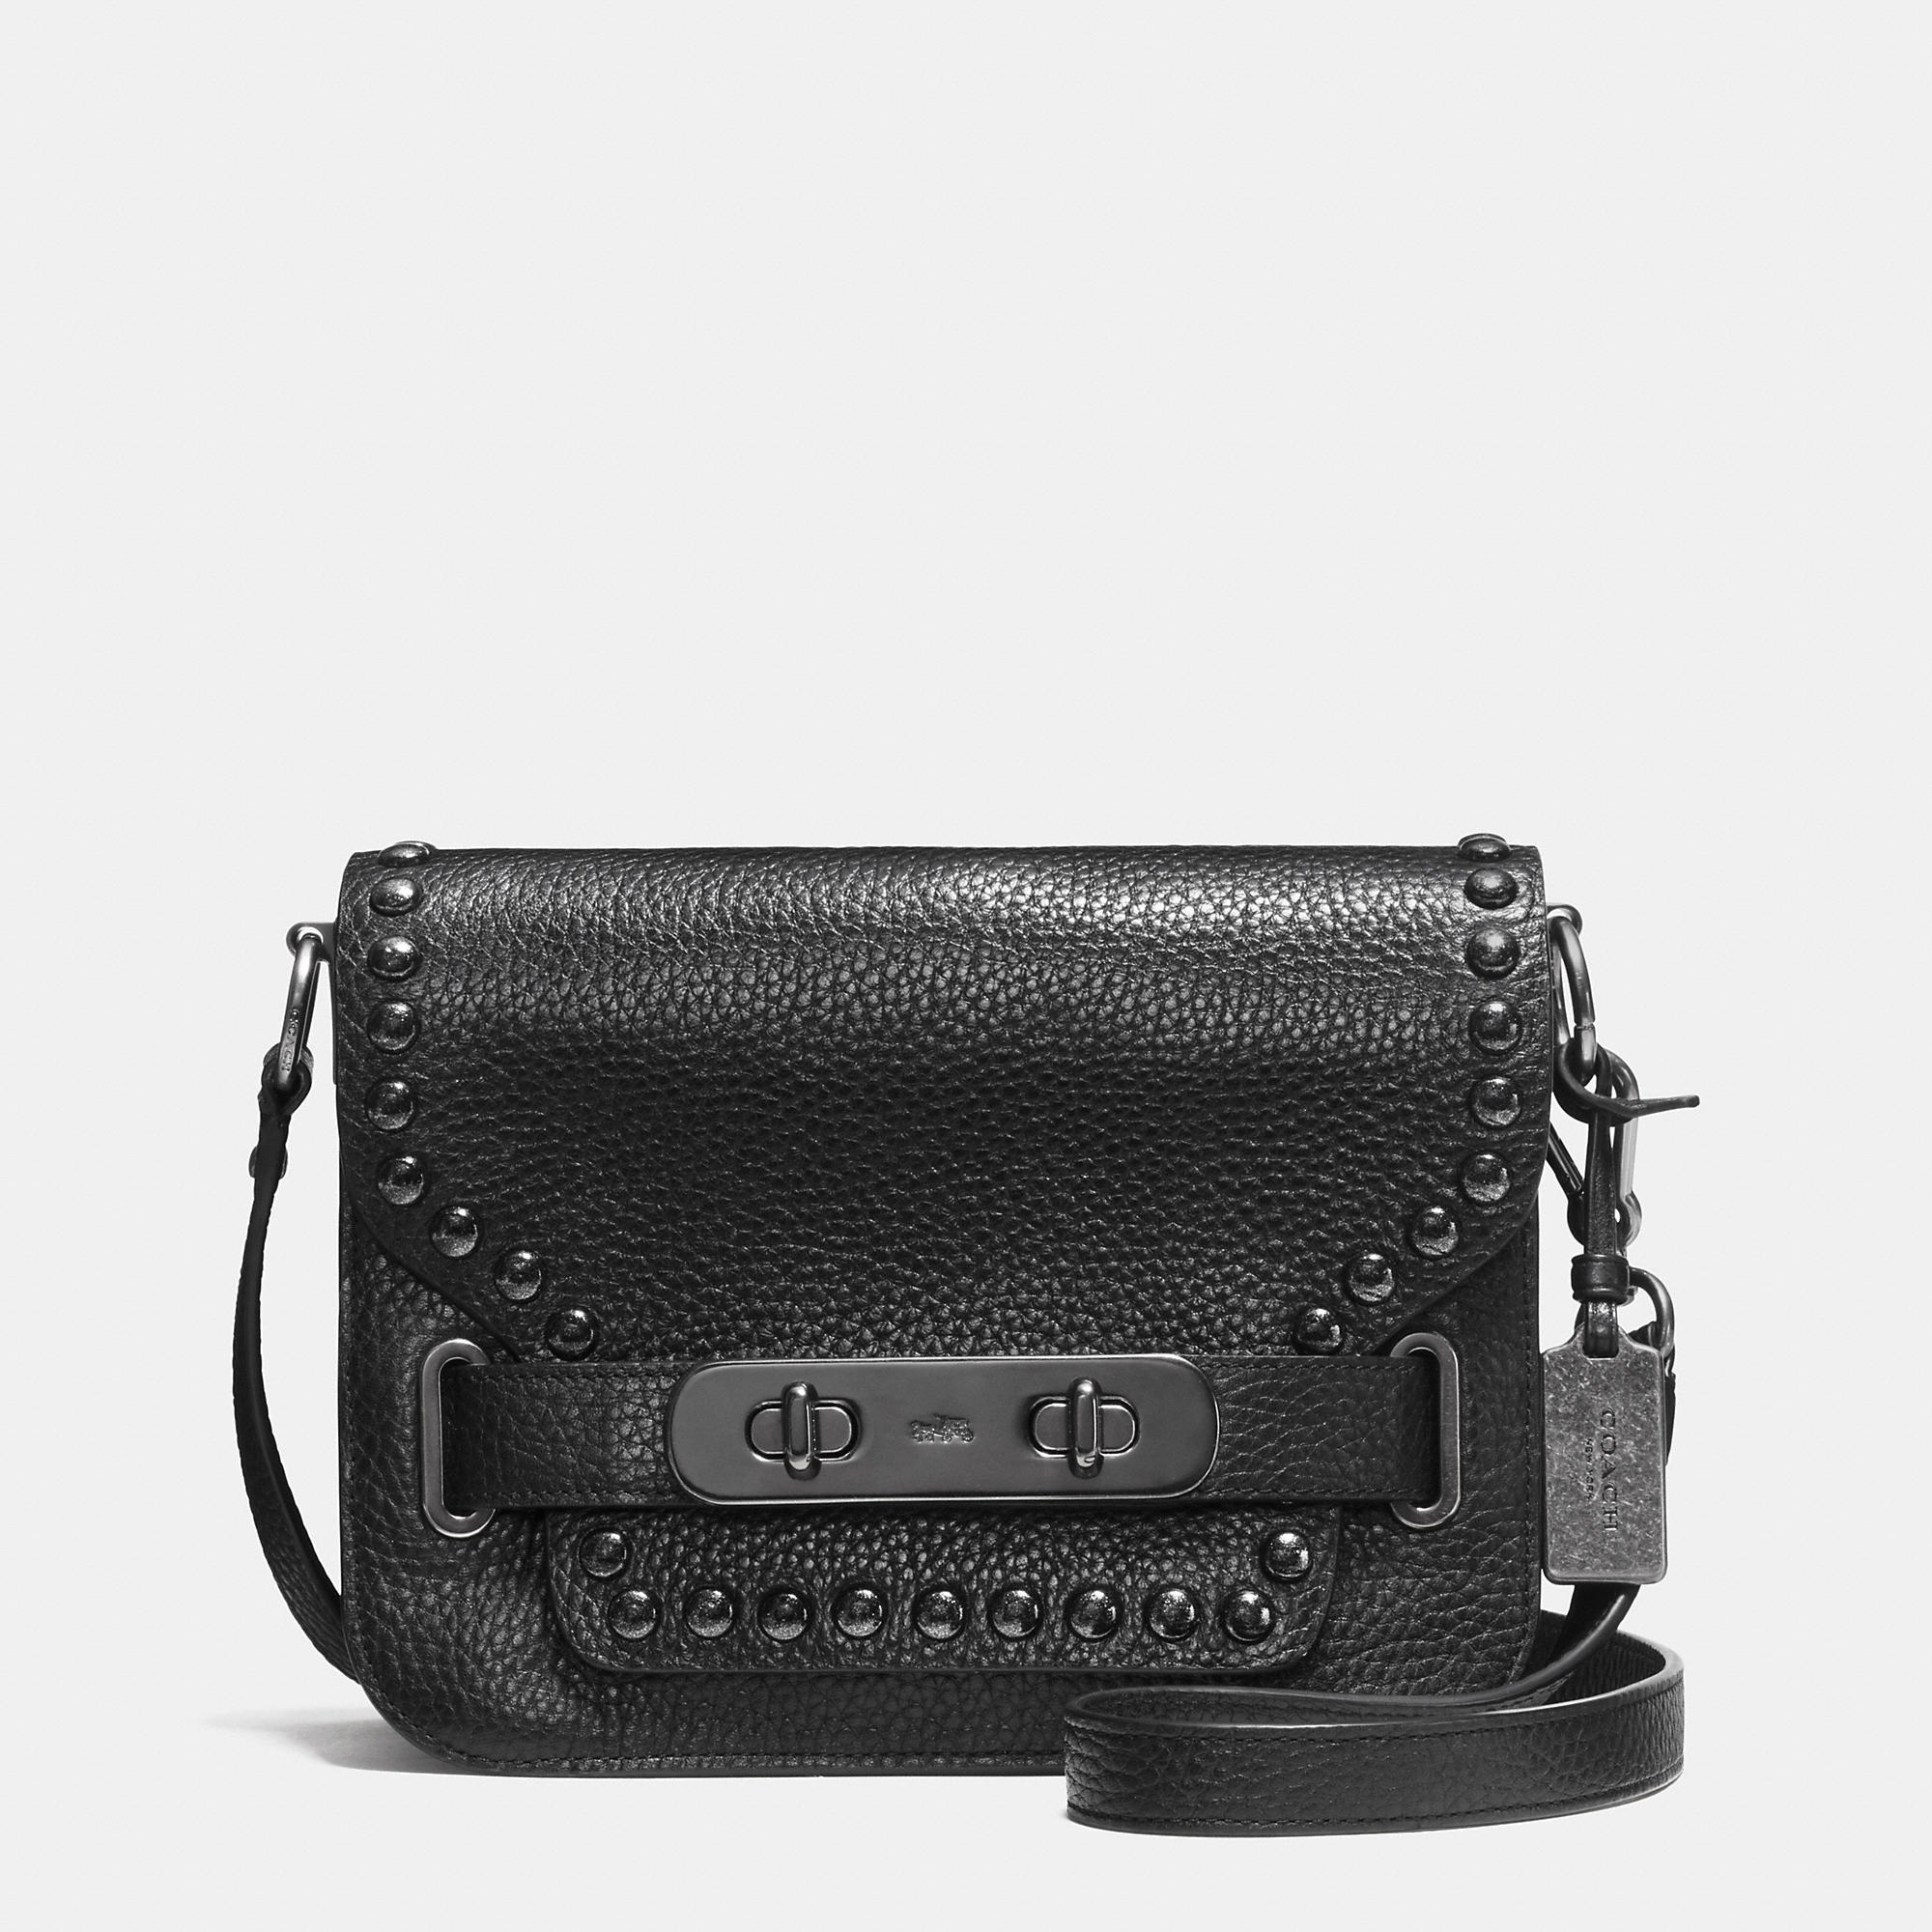 Lyst - Coach Swagger Small Shoulder Bag In Lacquer Rivets Pebble ...